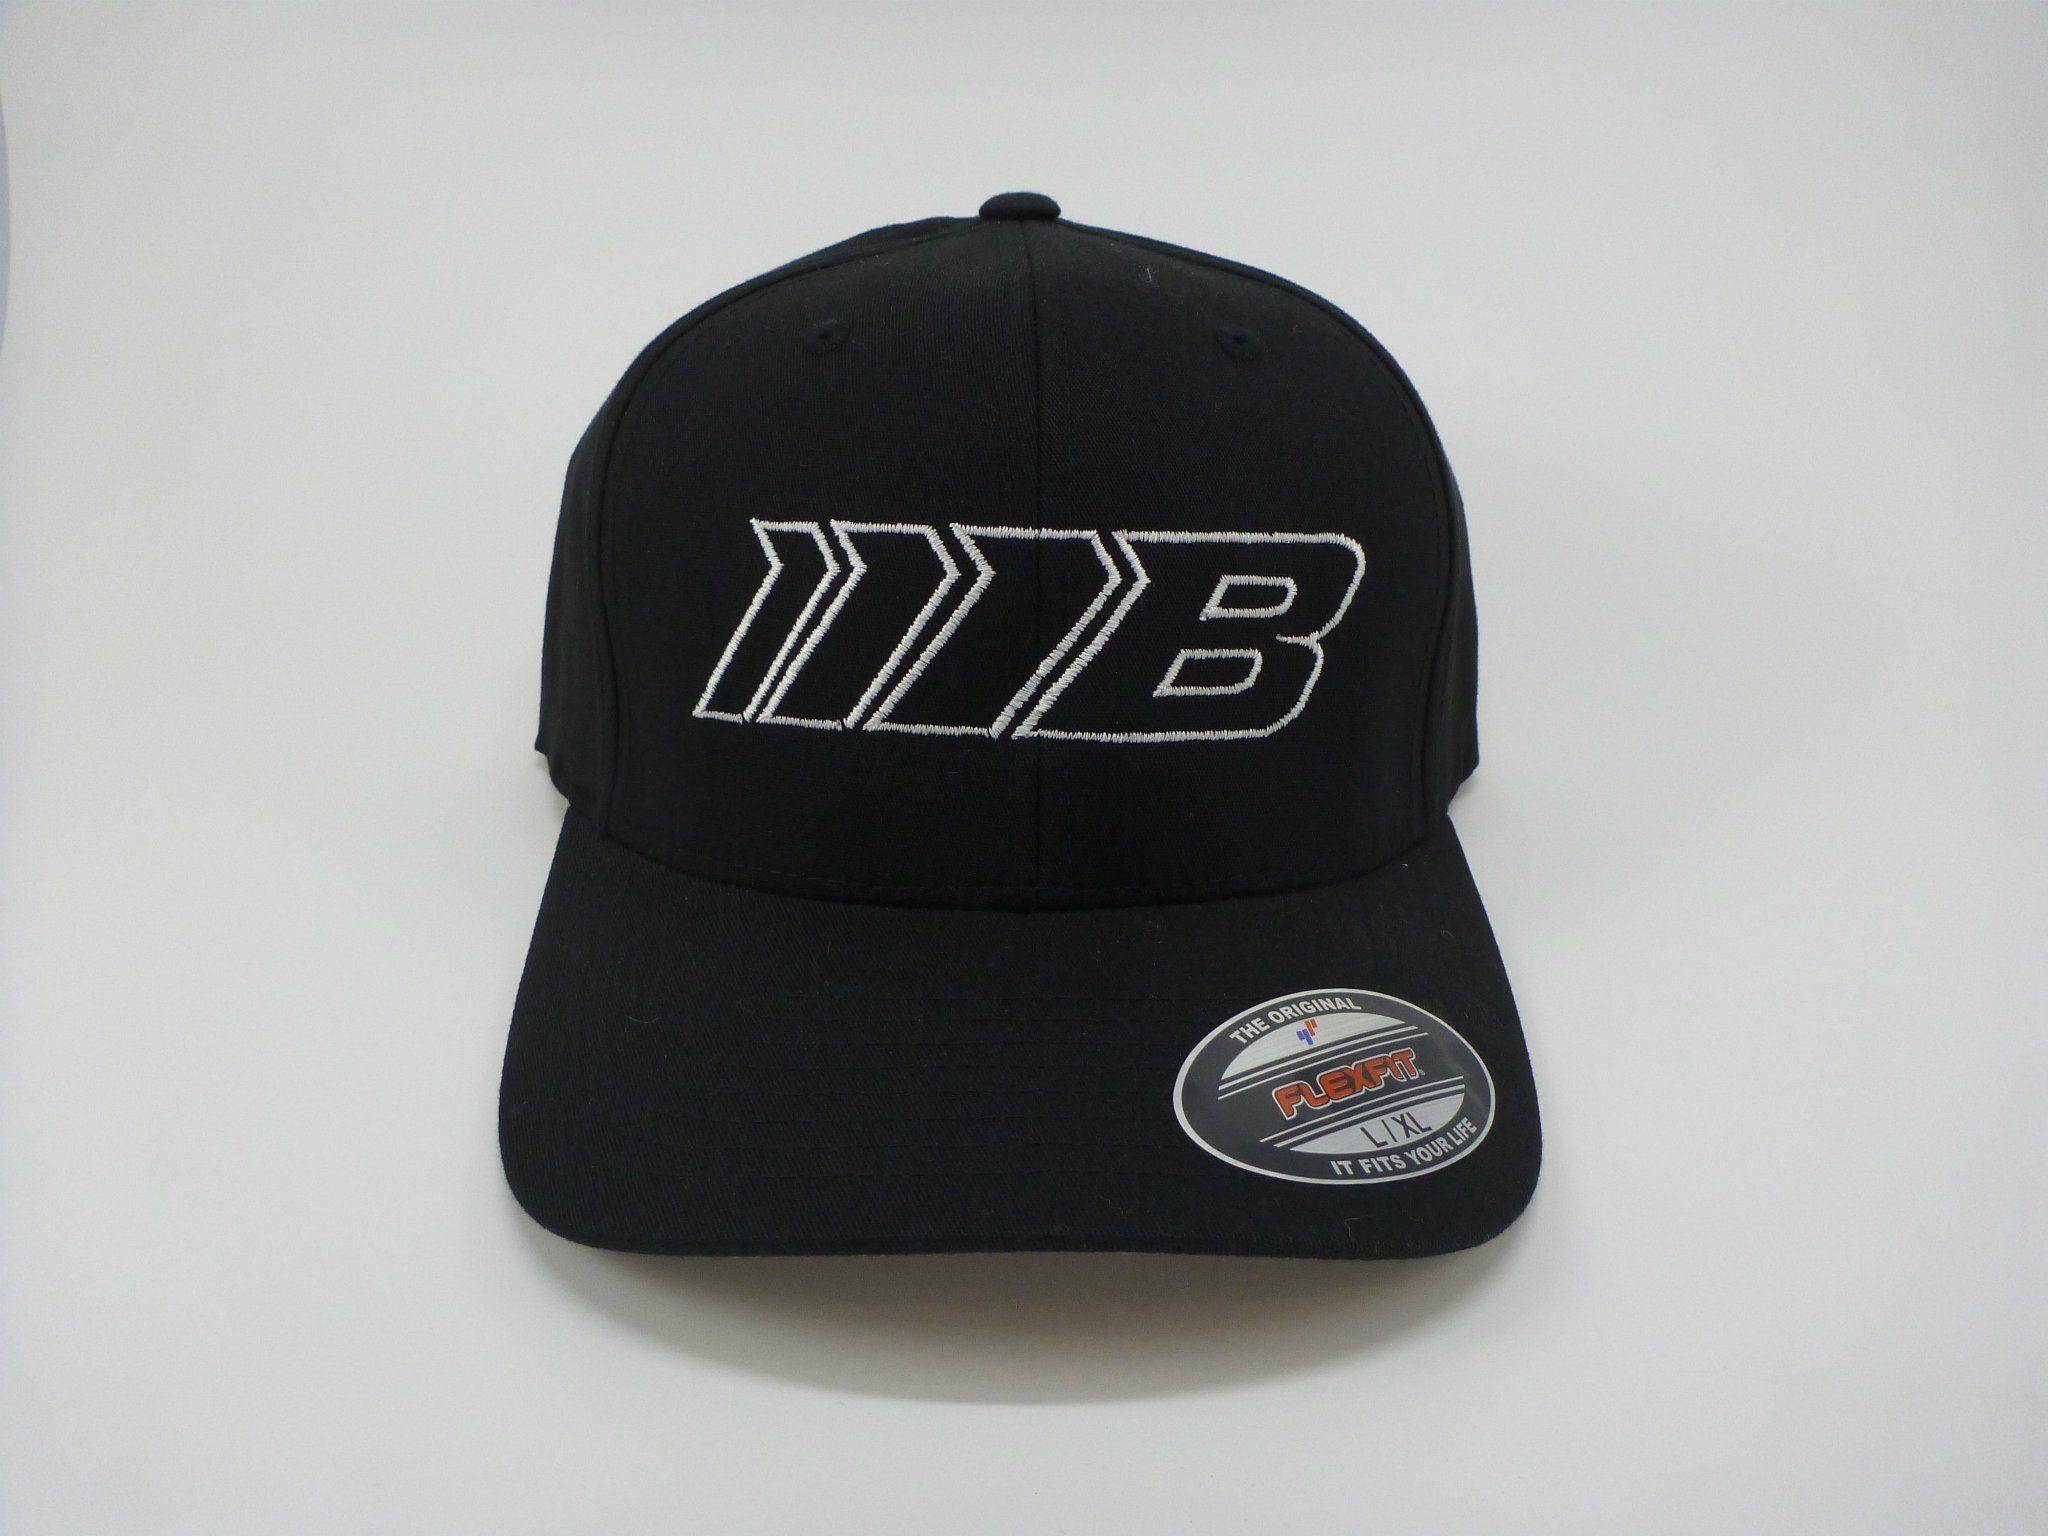 Green with White Outline Logo - Borg Motorsports Outline Logo Hat with Green or White Logo